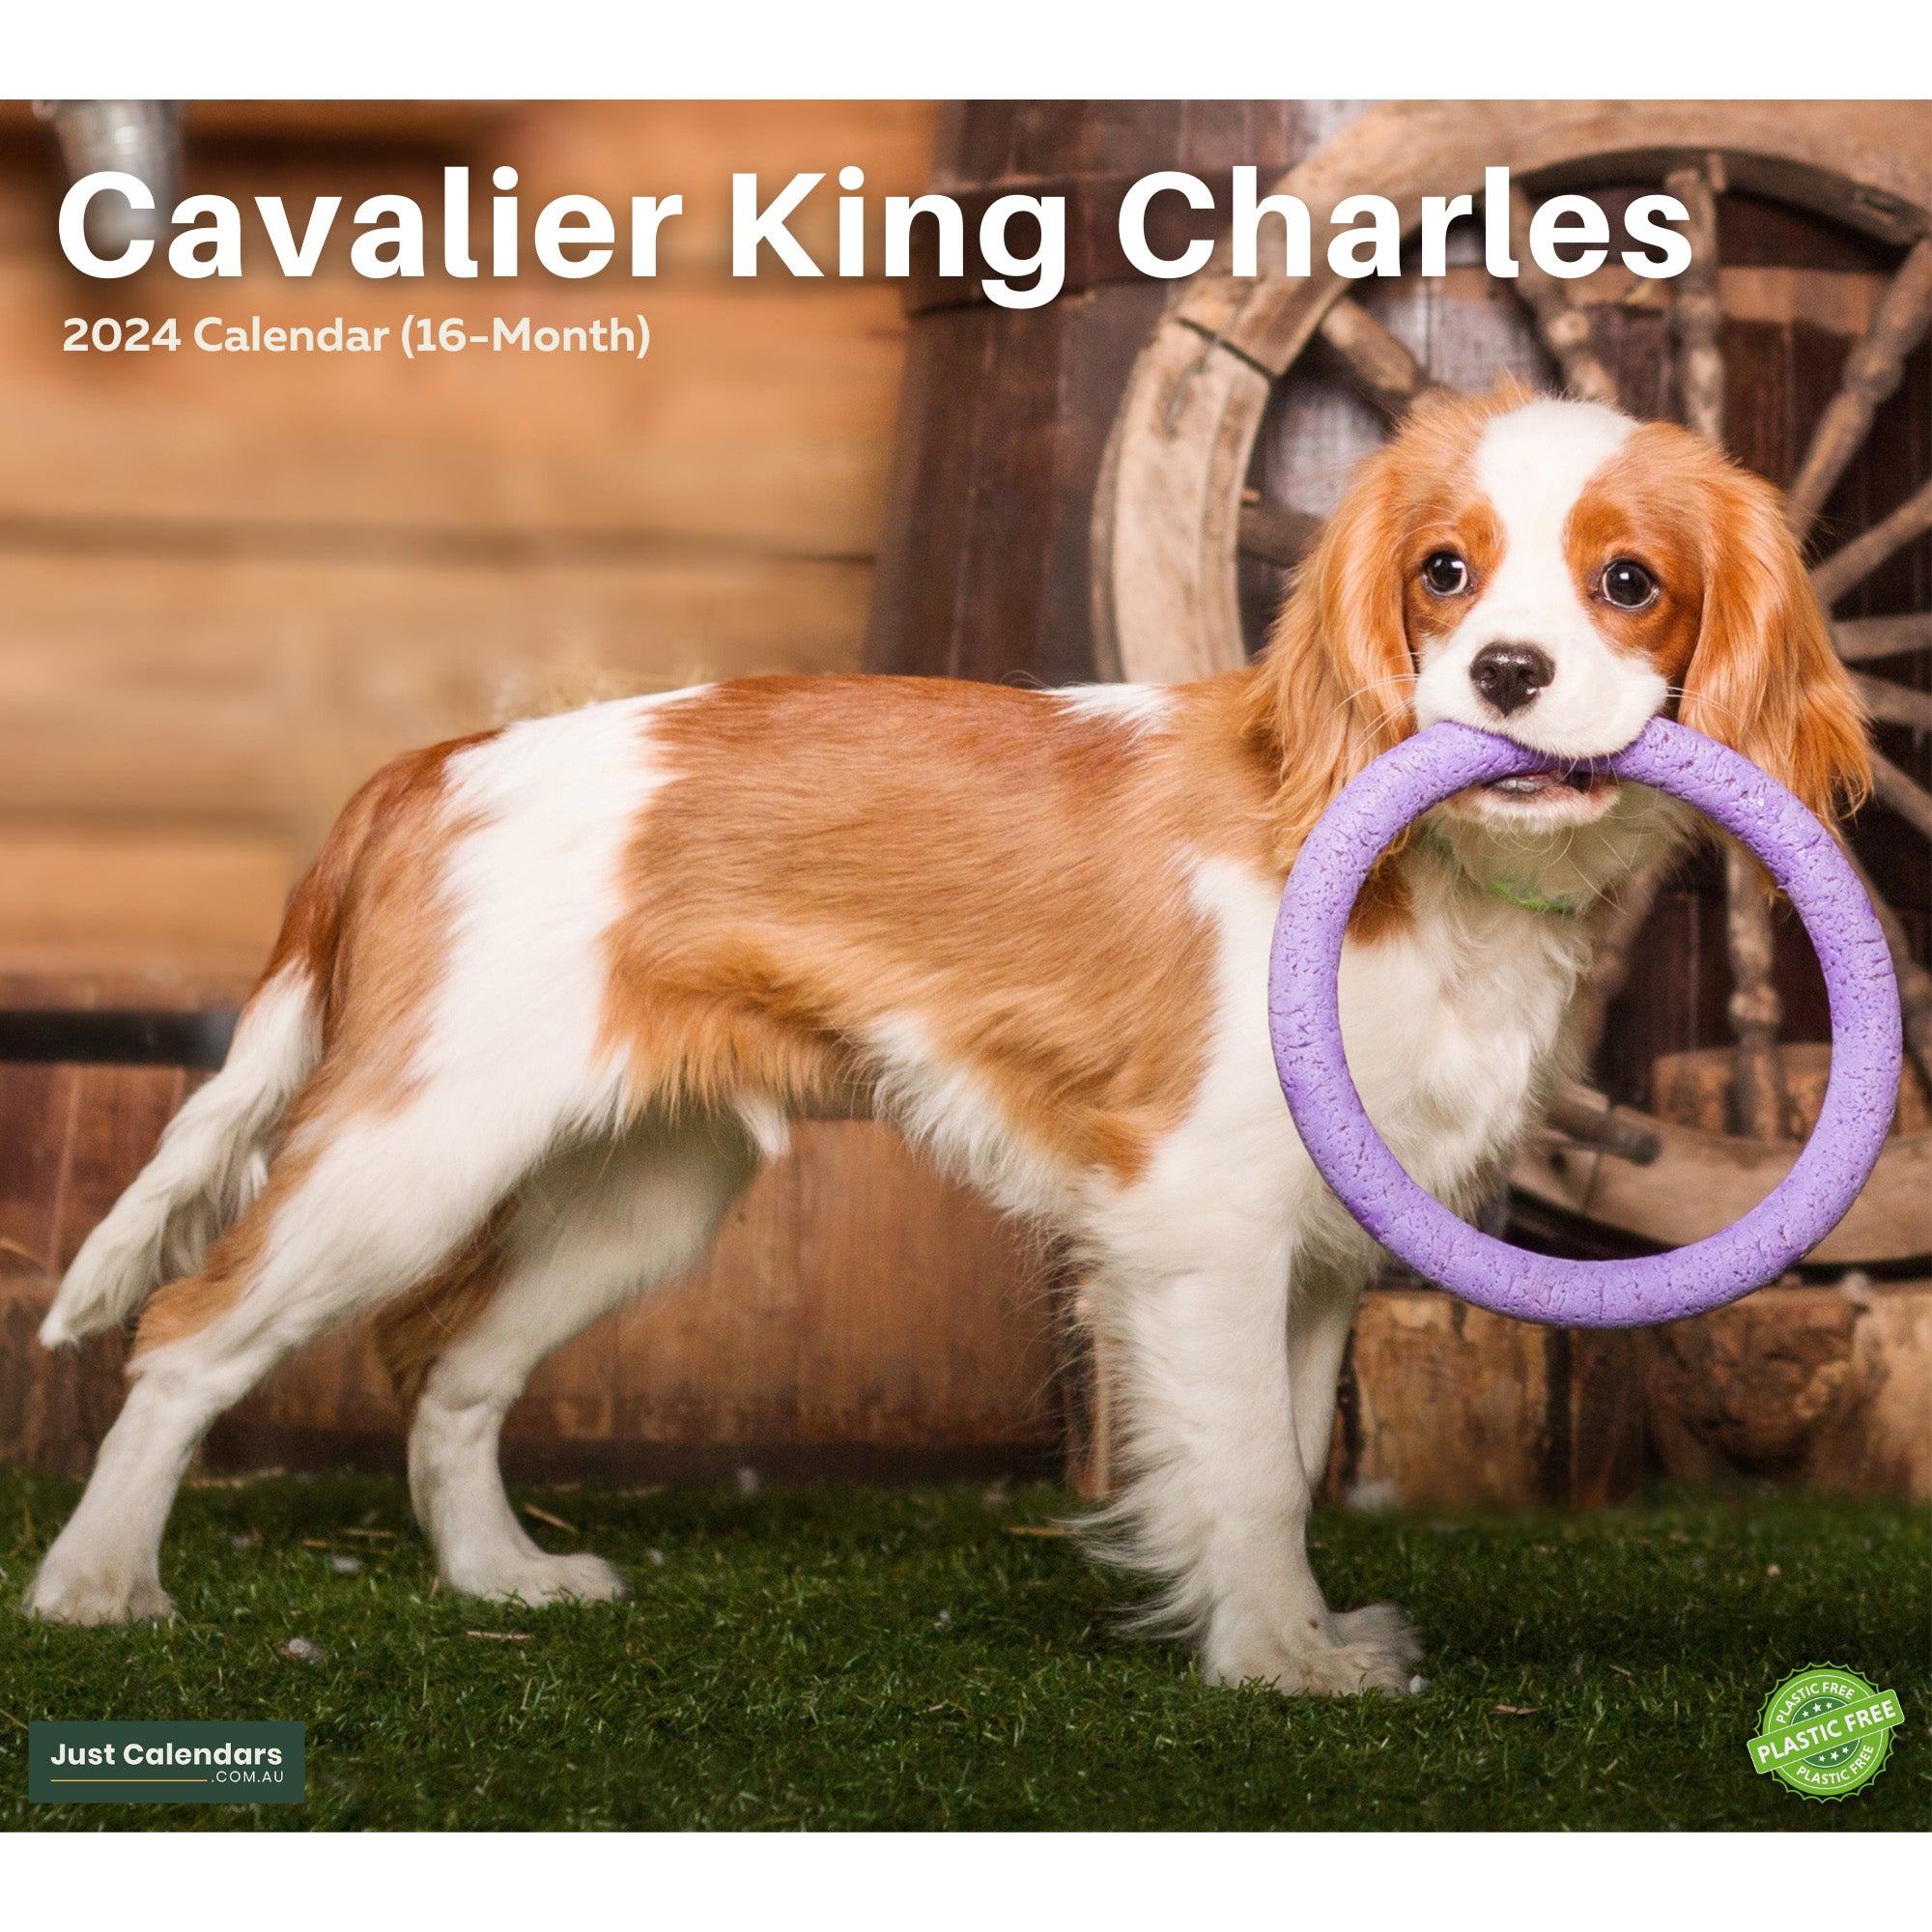 2024 Cavalier King Charles Dogs & Puppies - Deluxe Wall Calendar by Just Calendars - 16 Month - Plastic Free